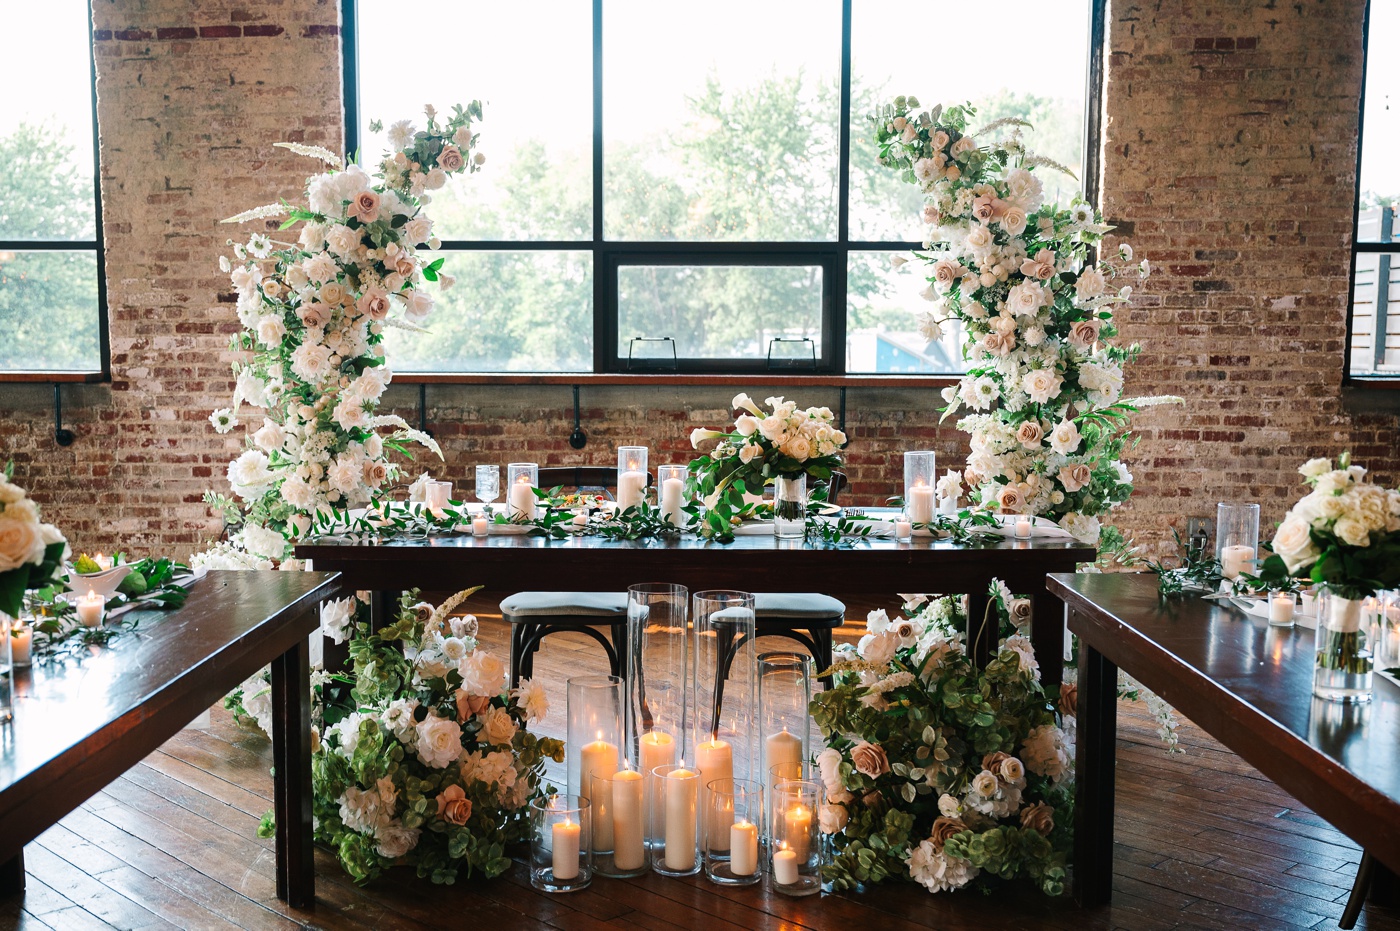 Sweetheart table with a white and blush floral crescent arch and candles